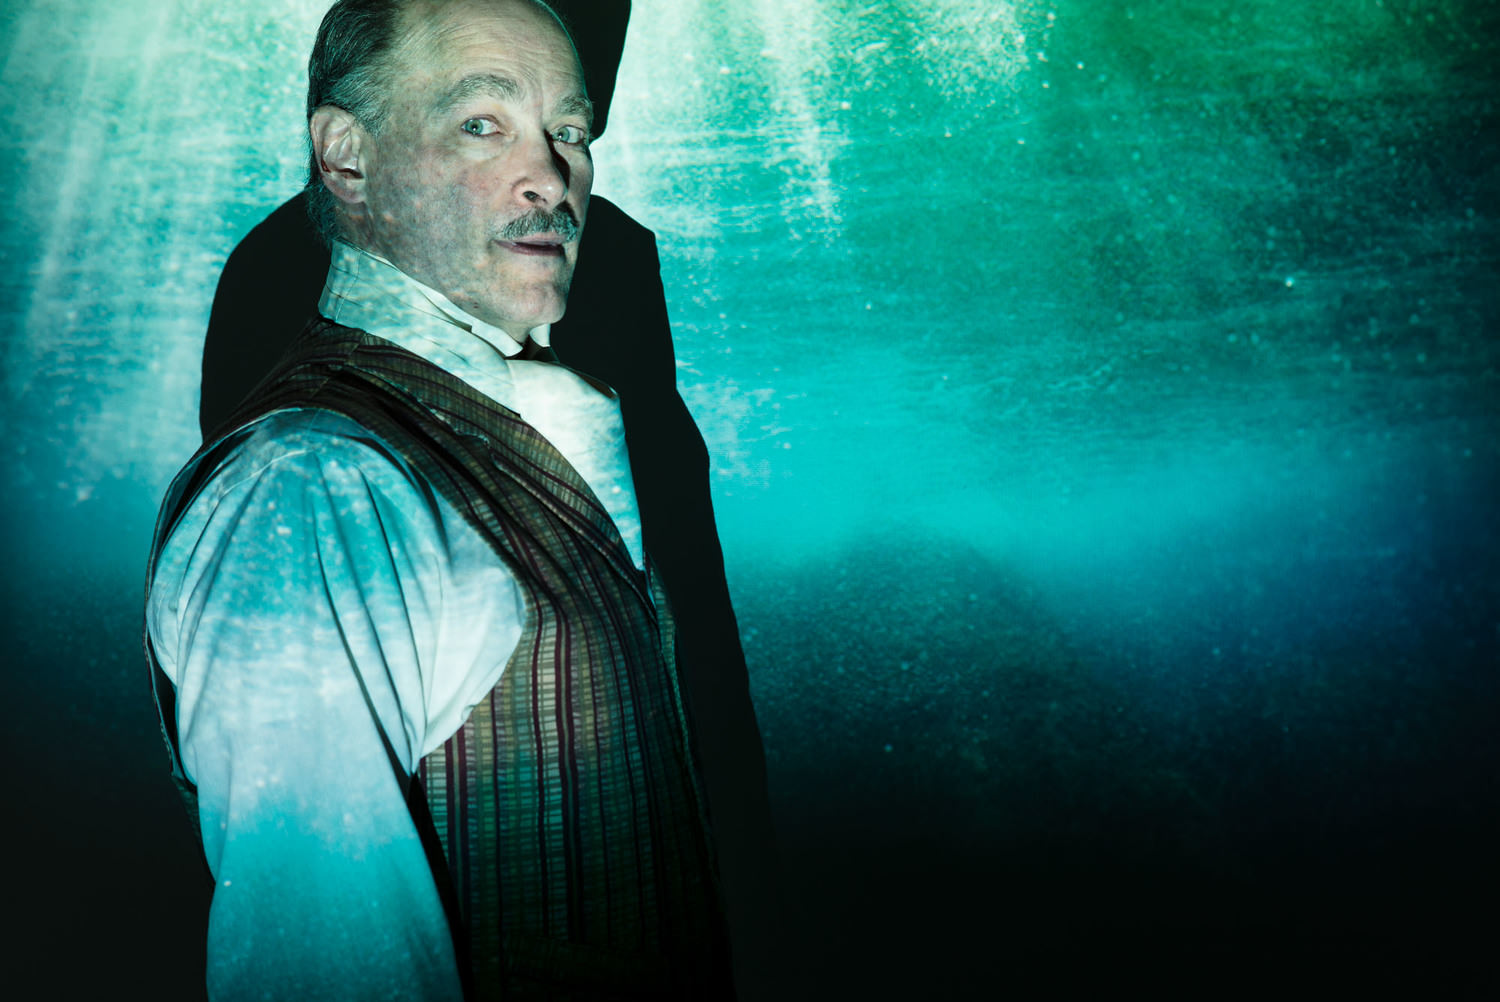 Peter Josephson as Louis deRougemont in theatre KAPOW's Shipwrecked! An Entertainment, February 22 - March 2 at the Derry Opera House. .http://www.tkapow.com/. Photo by Matthew Lomanno. 1